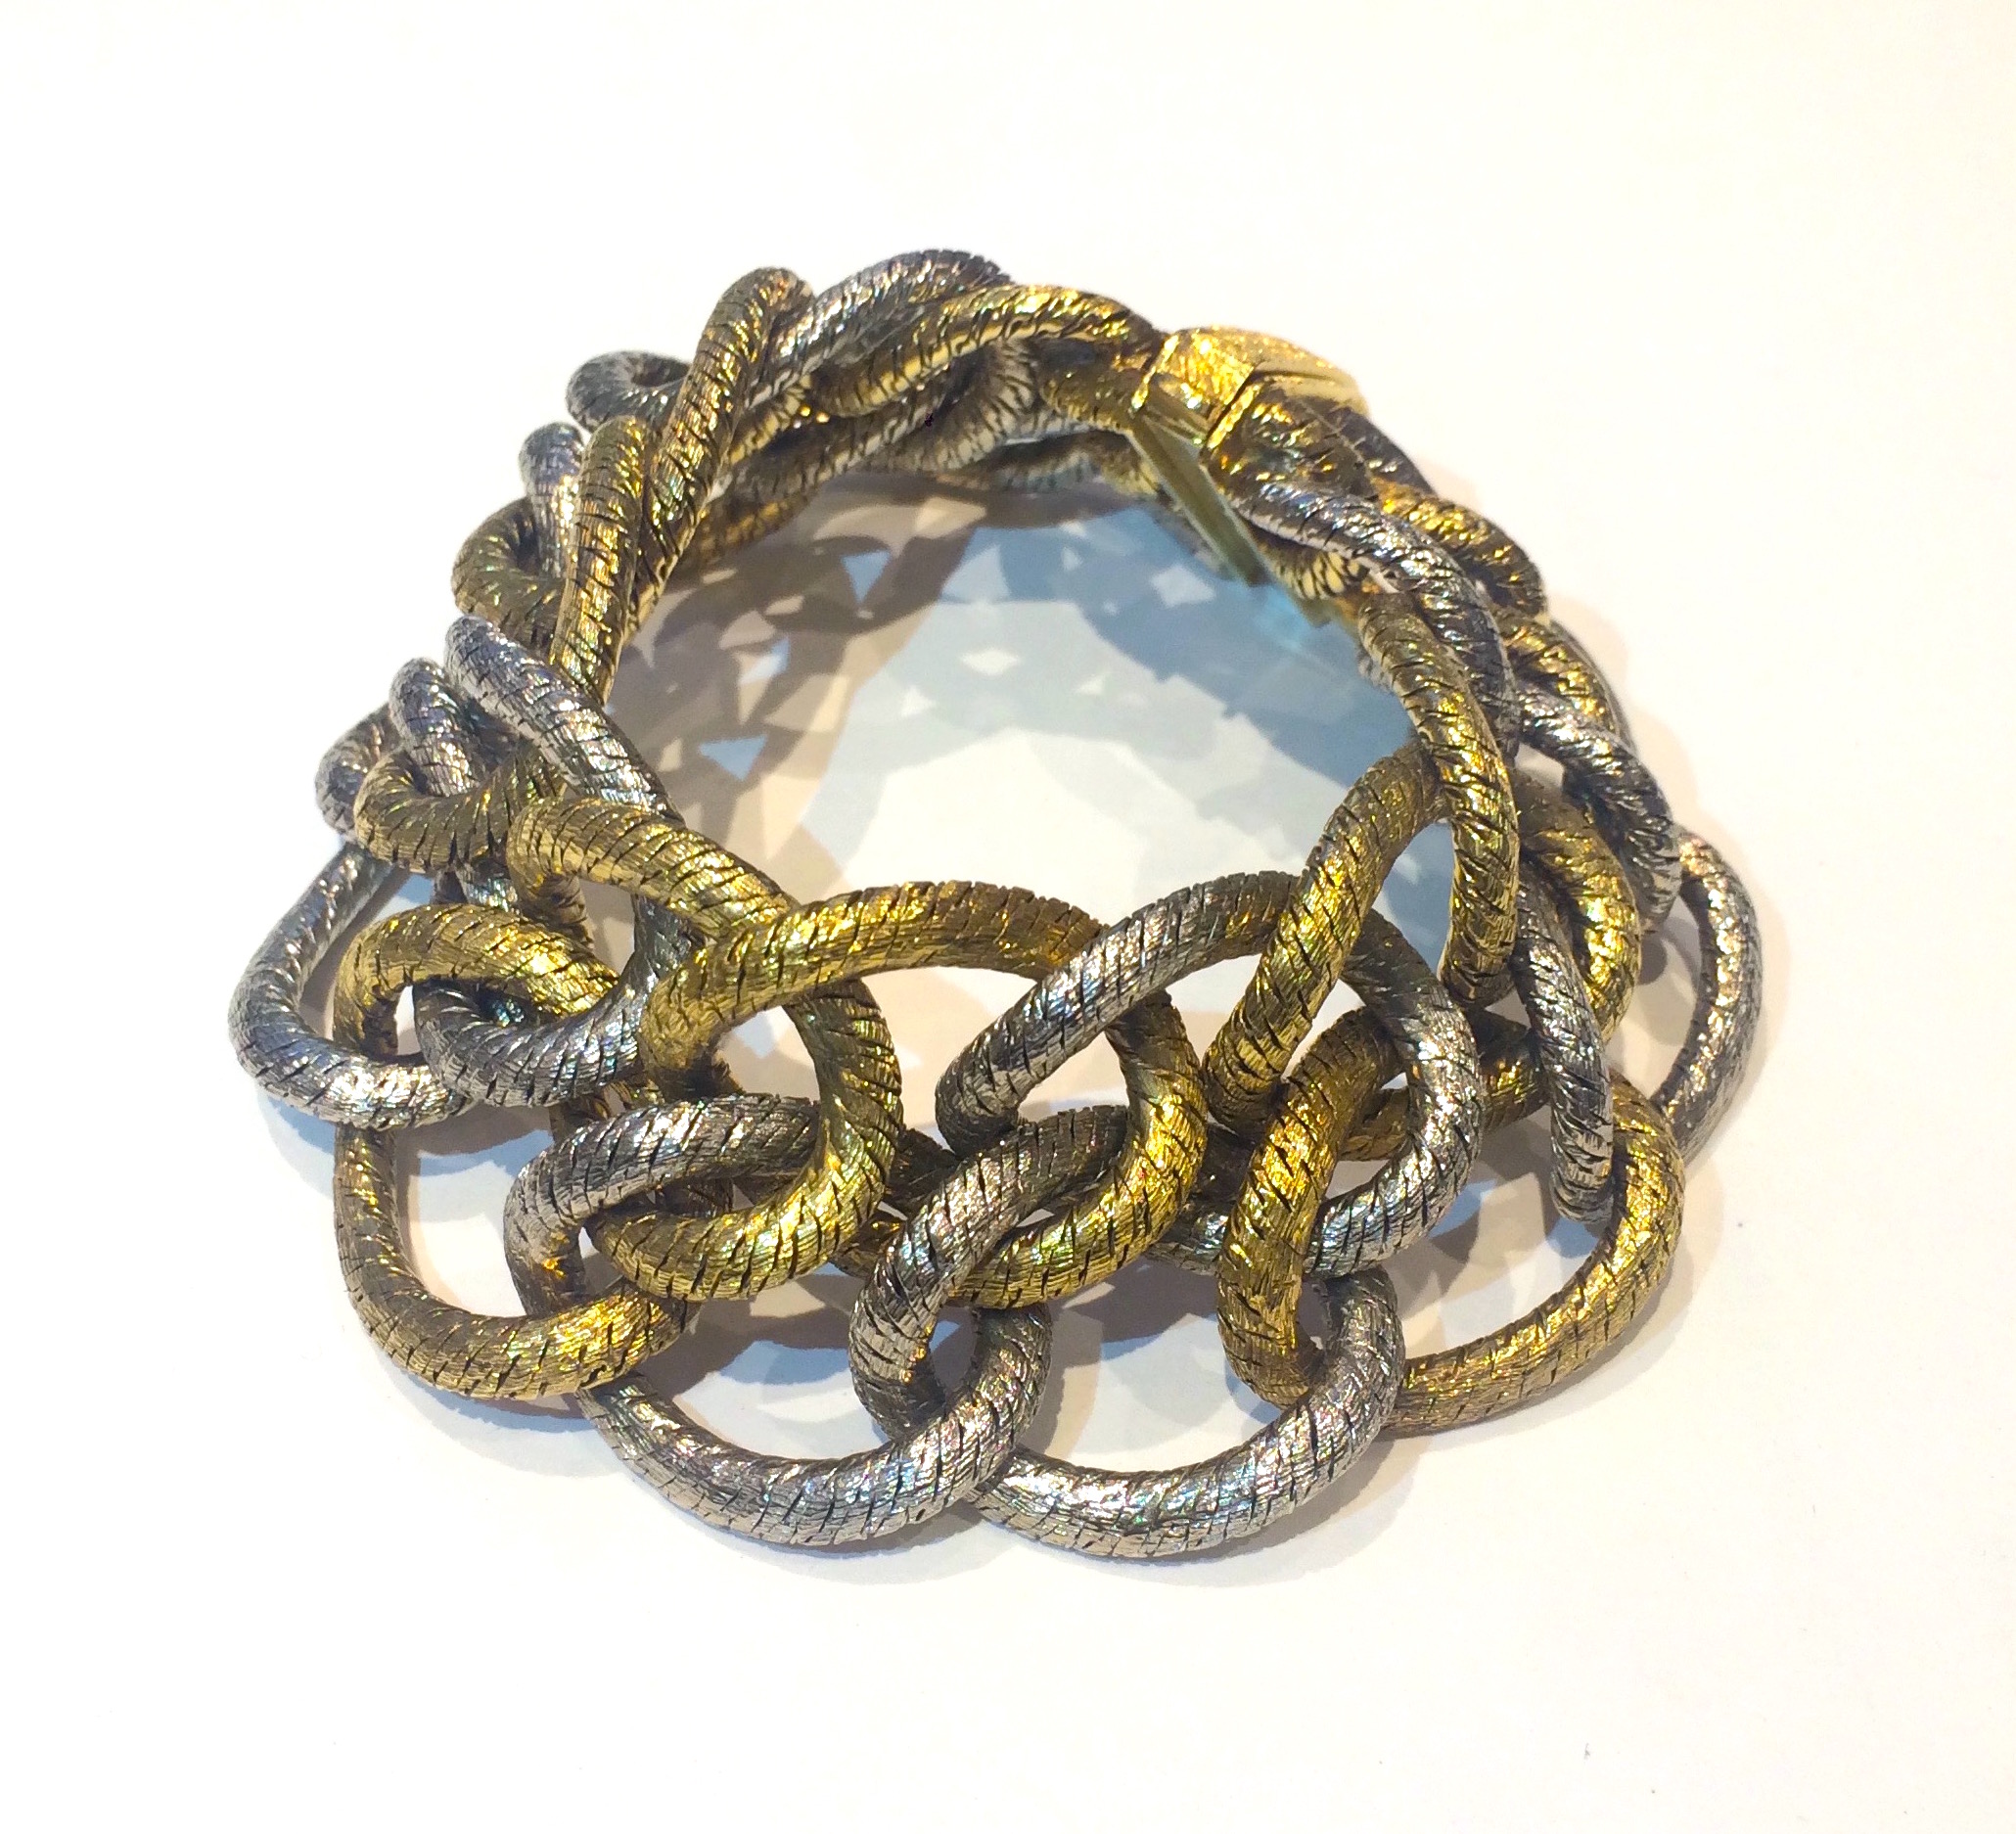 Retro (German) “Double Row” loop bracelet, woven yellow and white 18K gold, marked, c. 1960